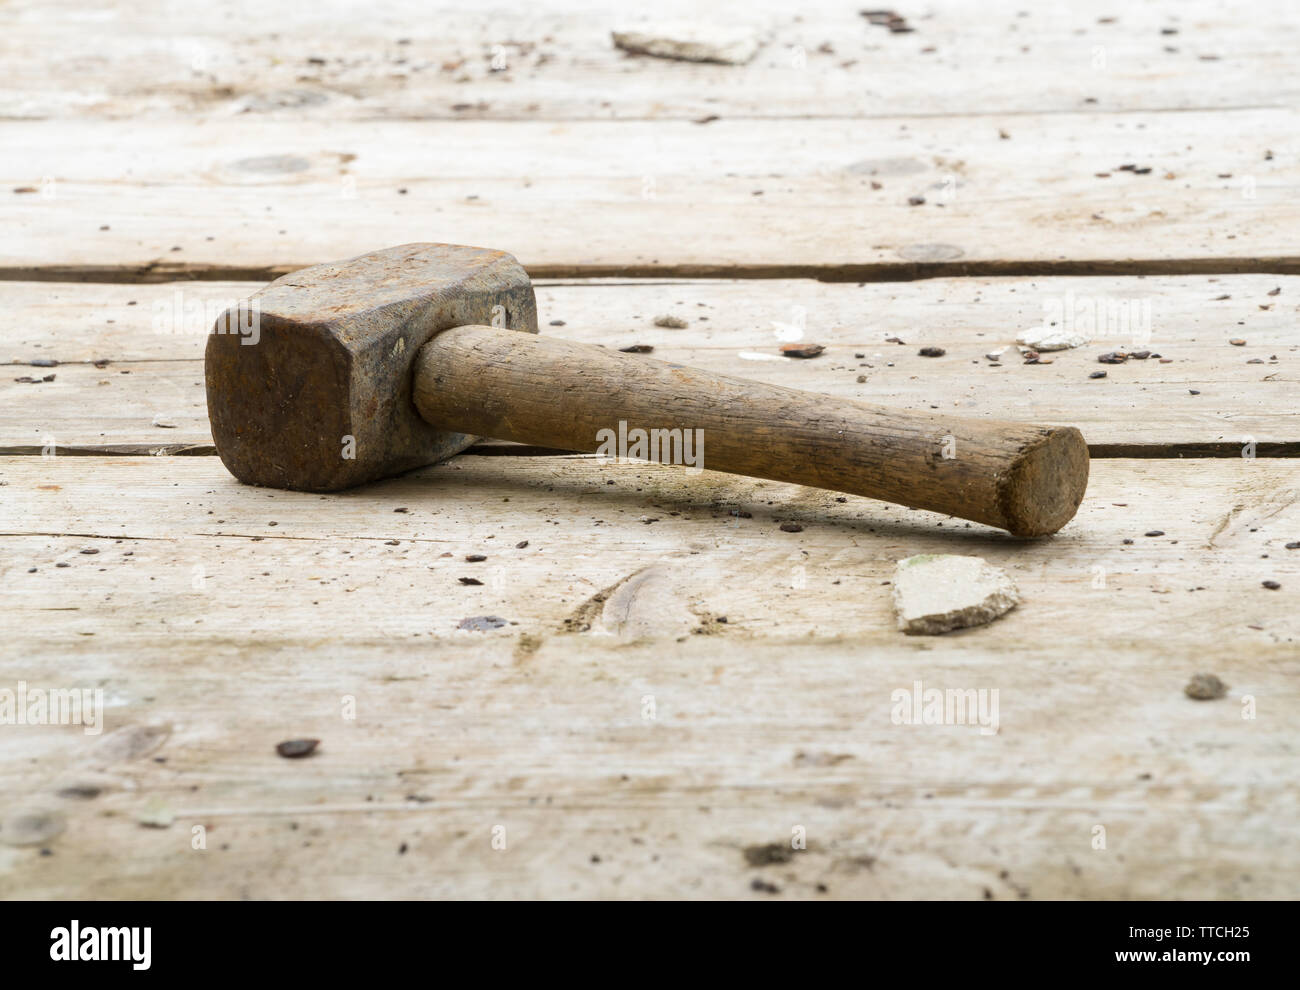 Lump hammer resting on wooden scaffolding planks on a building / construction site. Potential copy space above and under hammer. Stock Photo